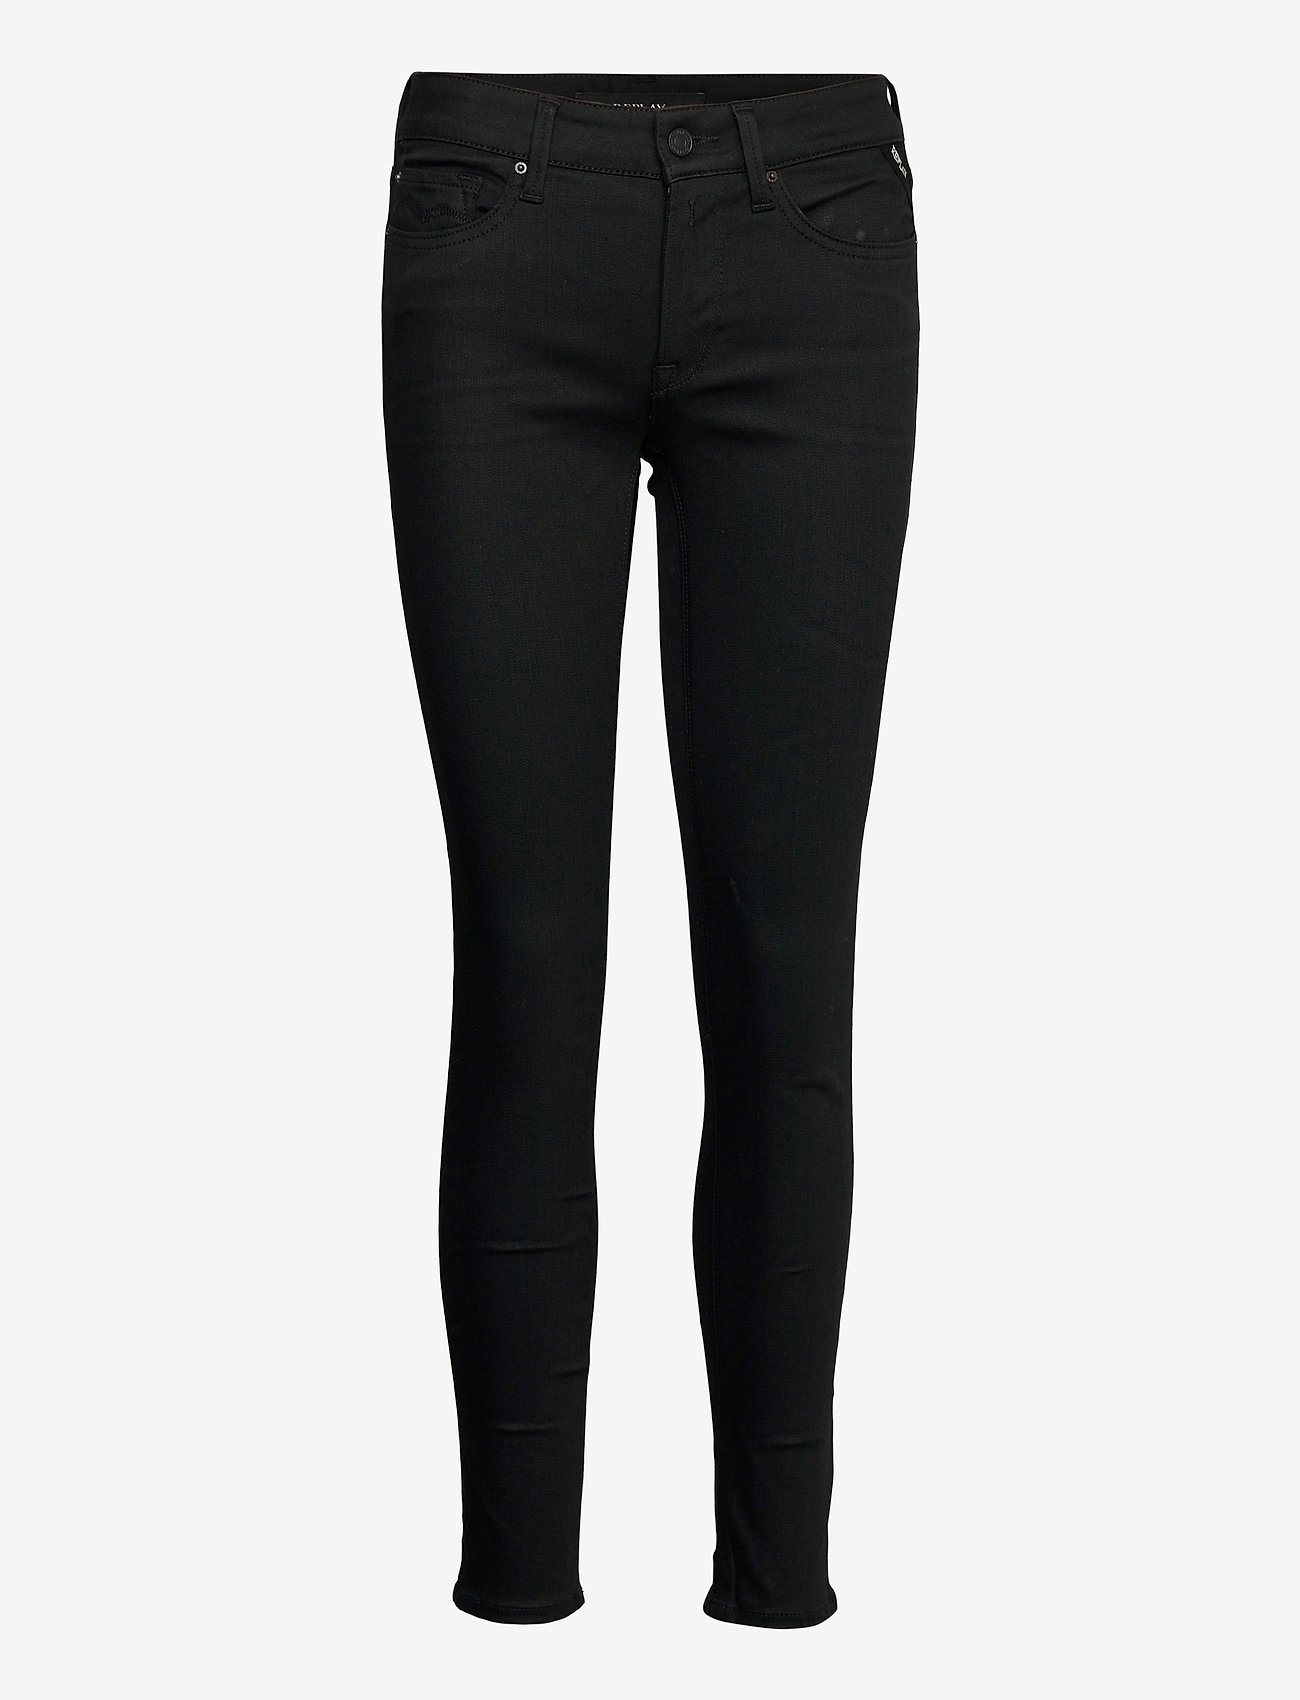 Replay New Luz Re-used Skinny jeans |